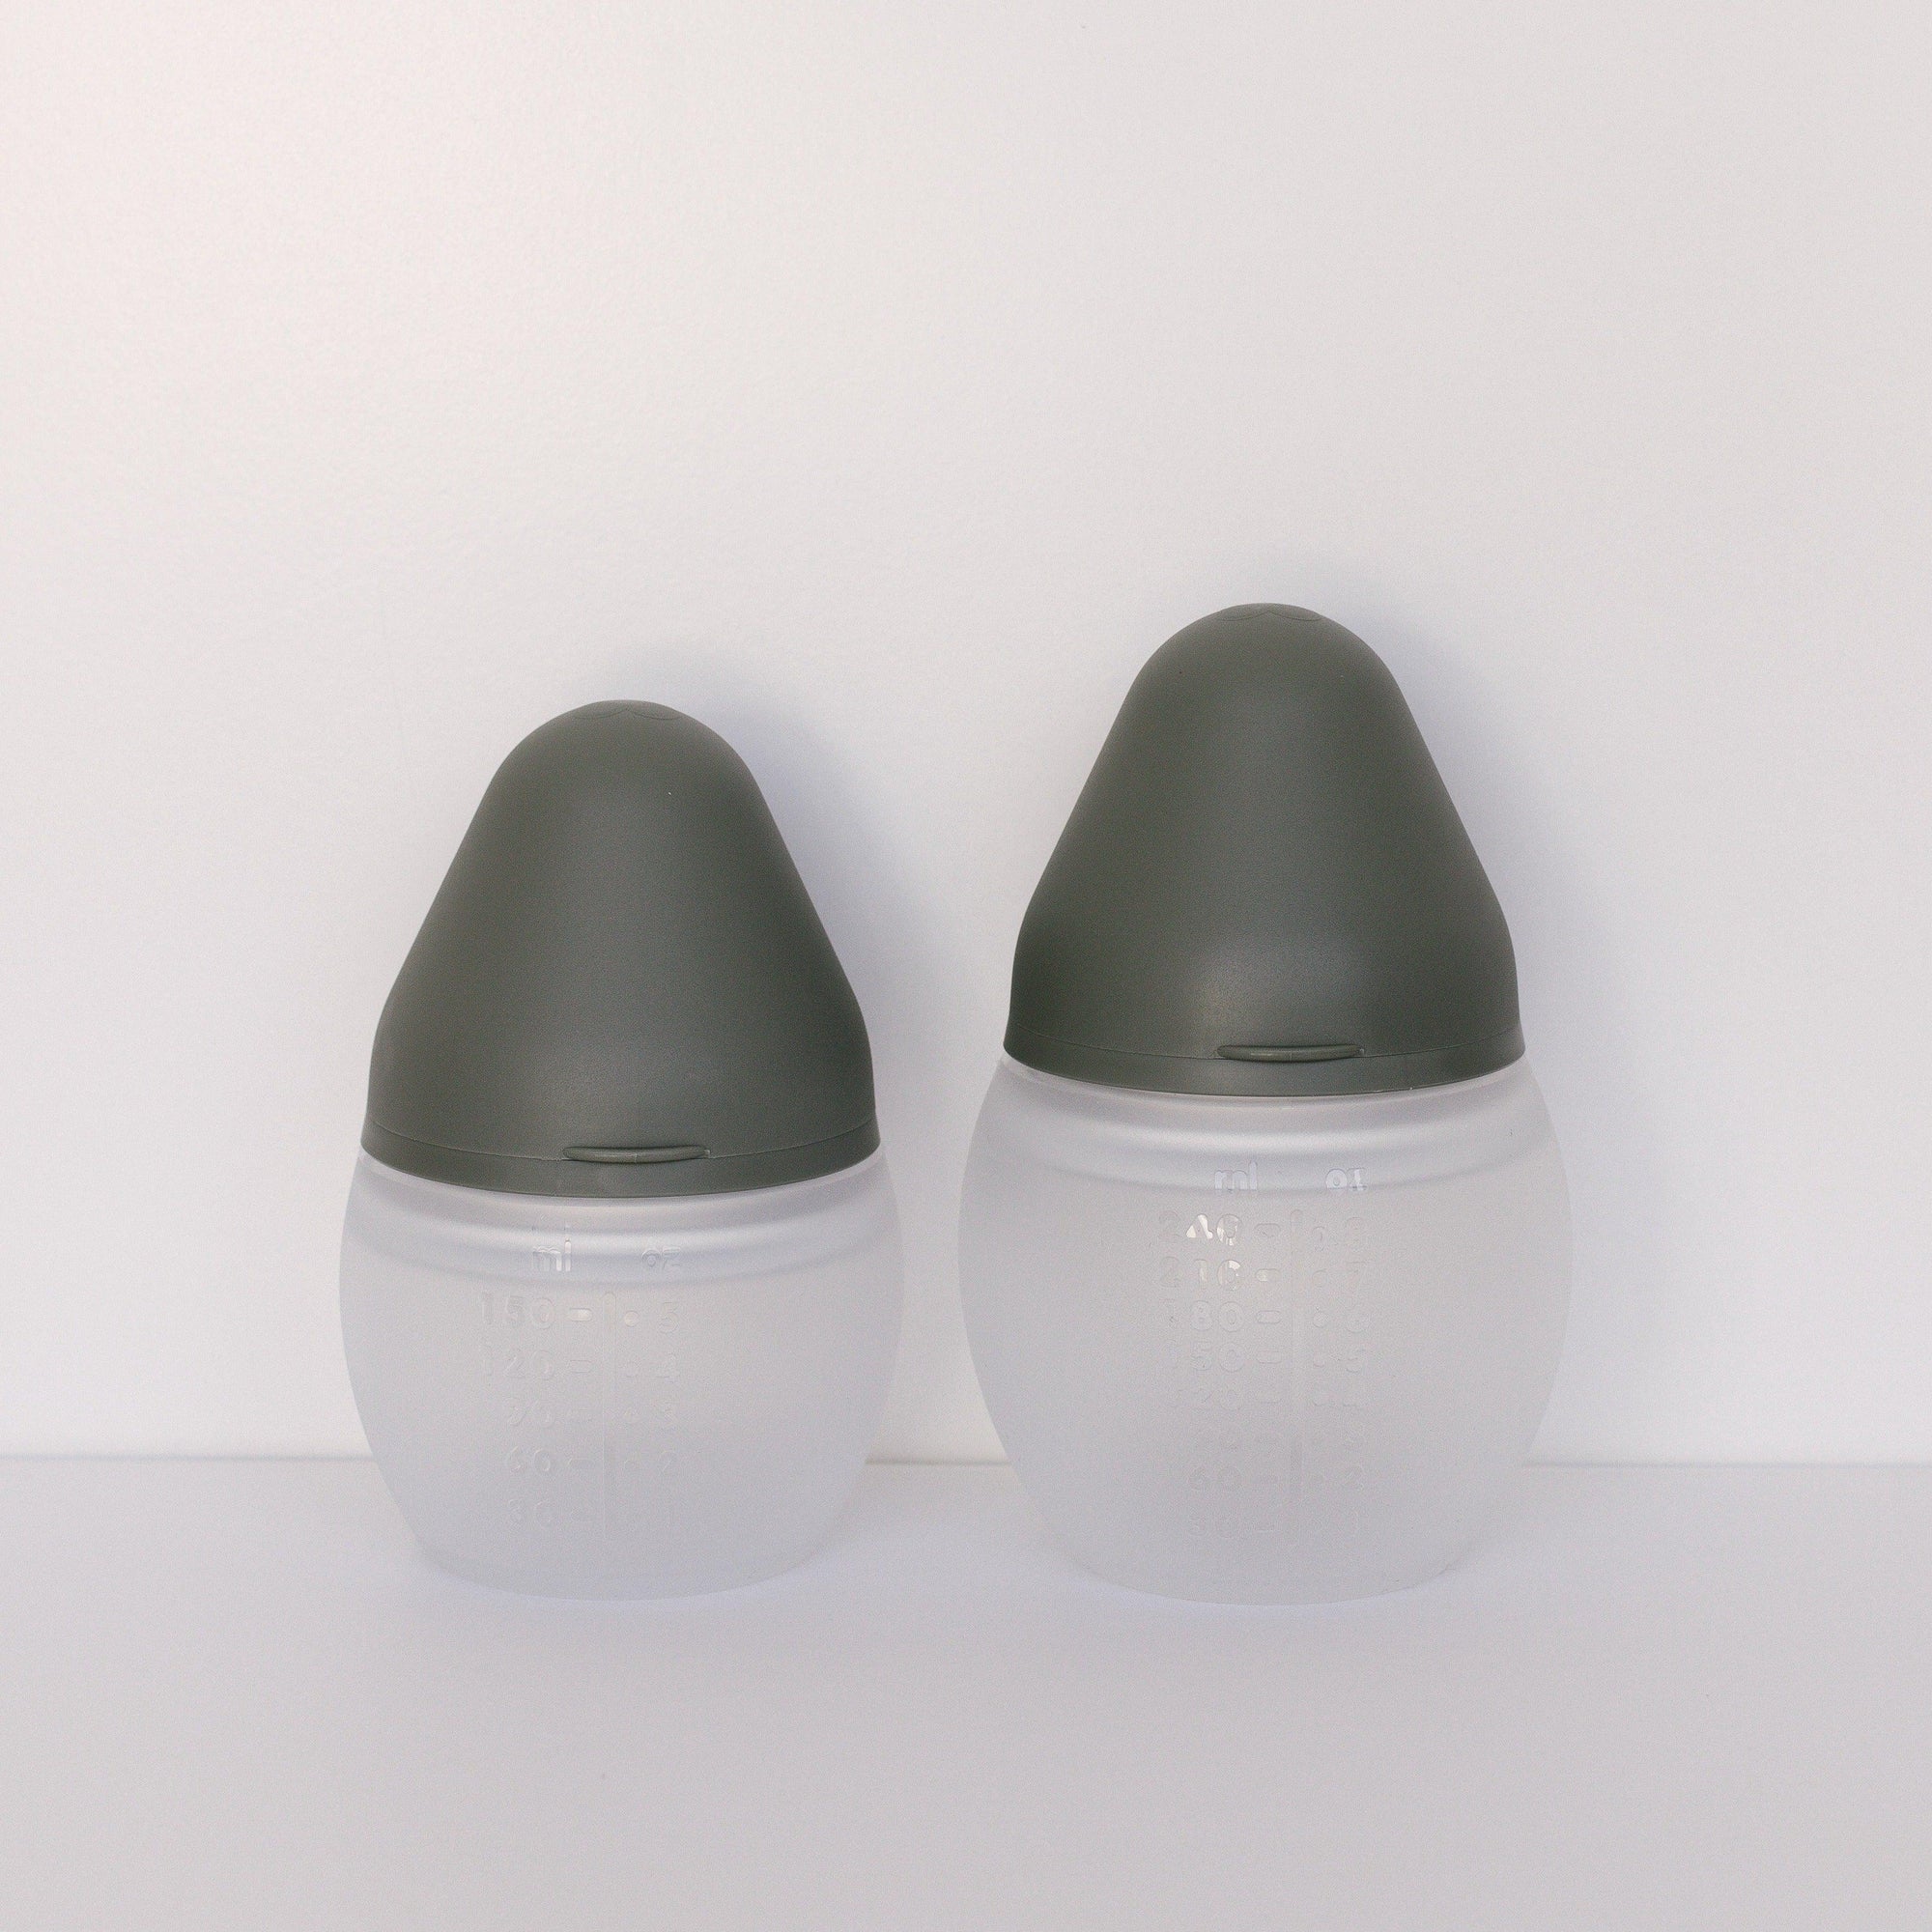 Two BibRond khaki bottles from Elhée France standing on a white surface.